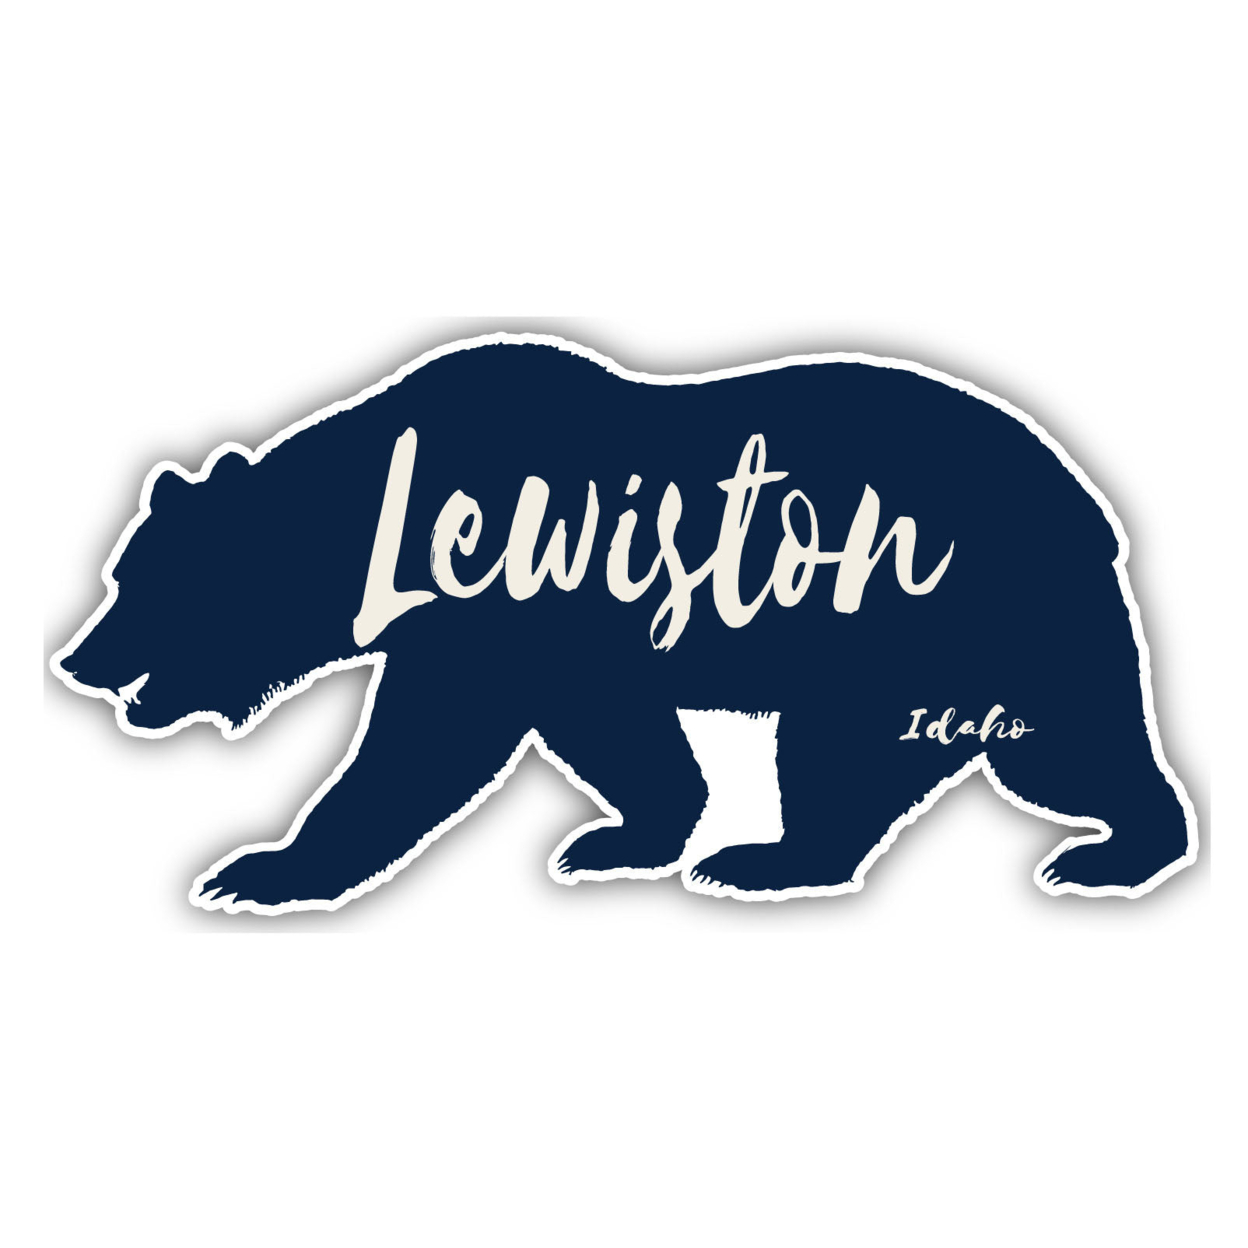 Lewiston Idaho Souvenir Decorative Stickers (Choose Theme And Size) - 4-Inch, Great Outdoors